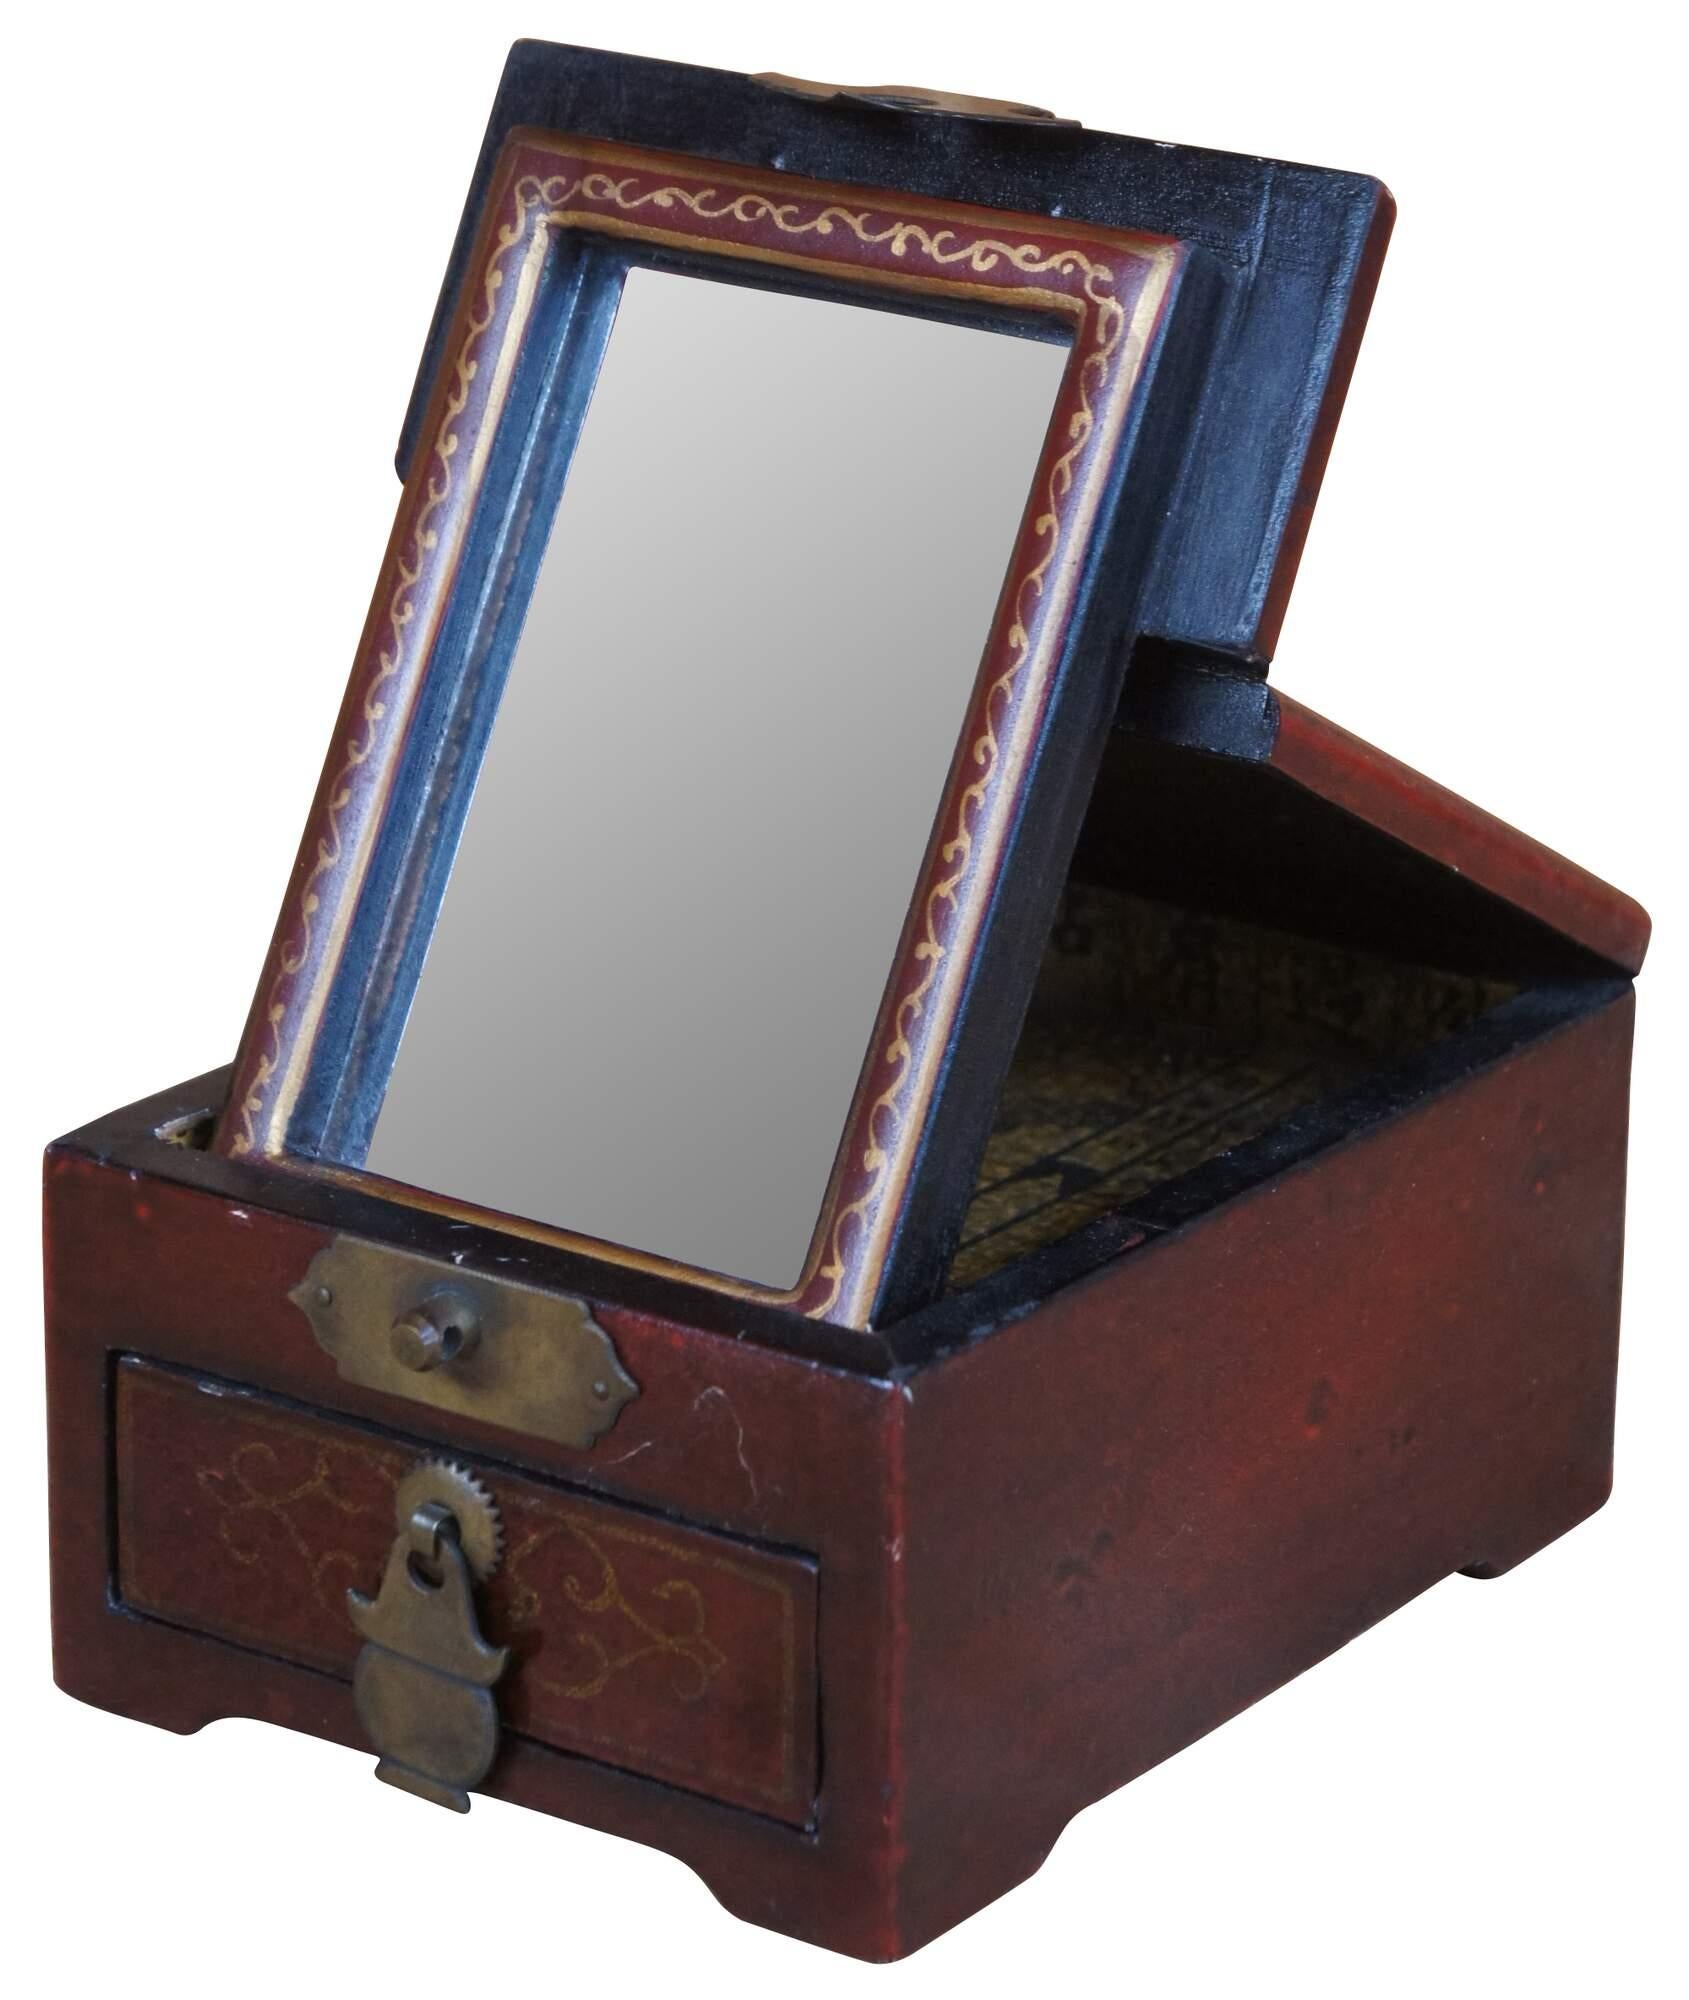 Antique Chinese chinoiserie flip top shaving or jewelry / vanity / cosmetics box with a mirror and drawer lined with paper depicting Maxims for the well Governed Household and Hundreds of Chinese Surnames.

Translation of inner lining:
1 ???? zhì